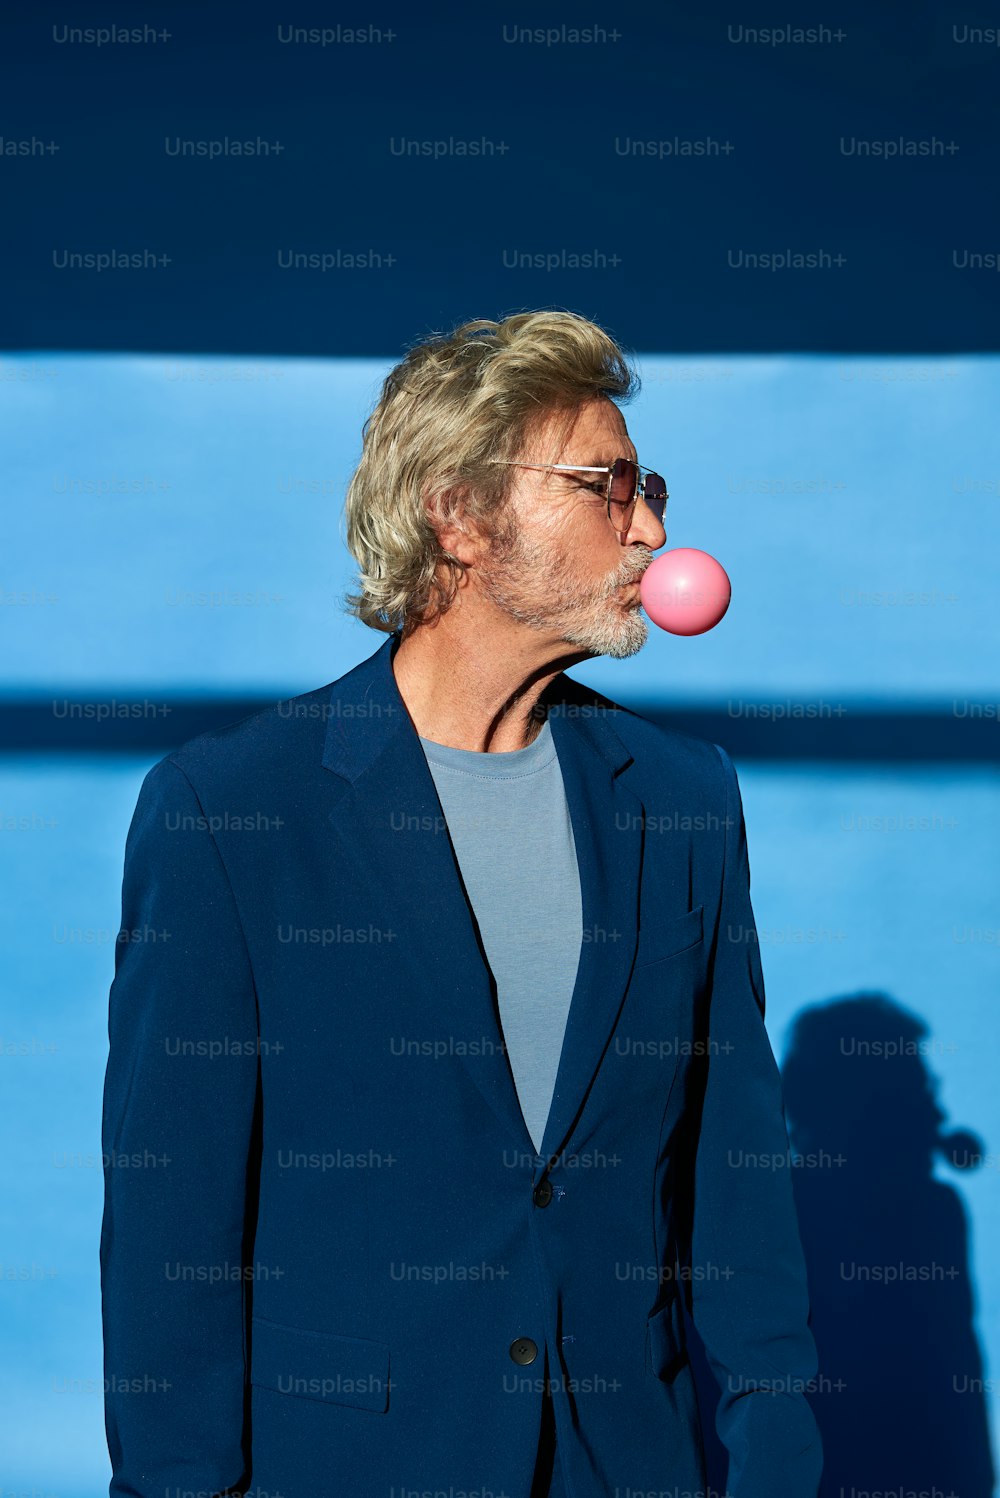 a man in a suit blowing a pink bubble